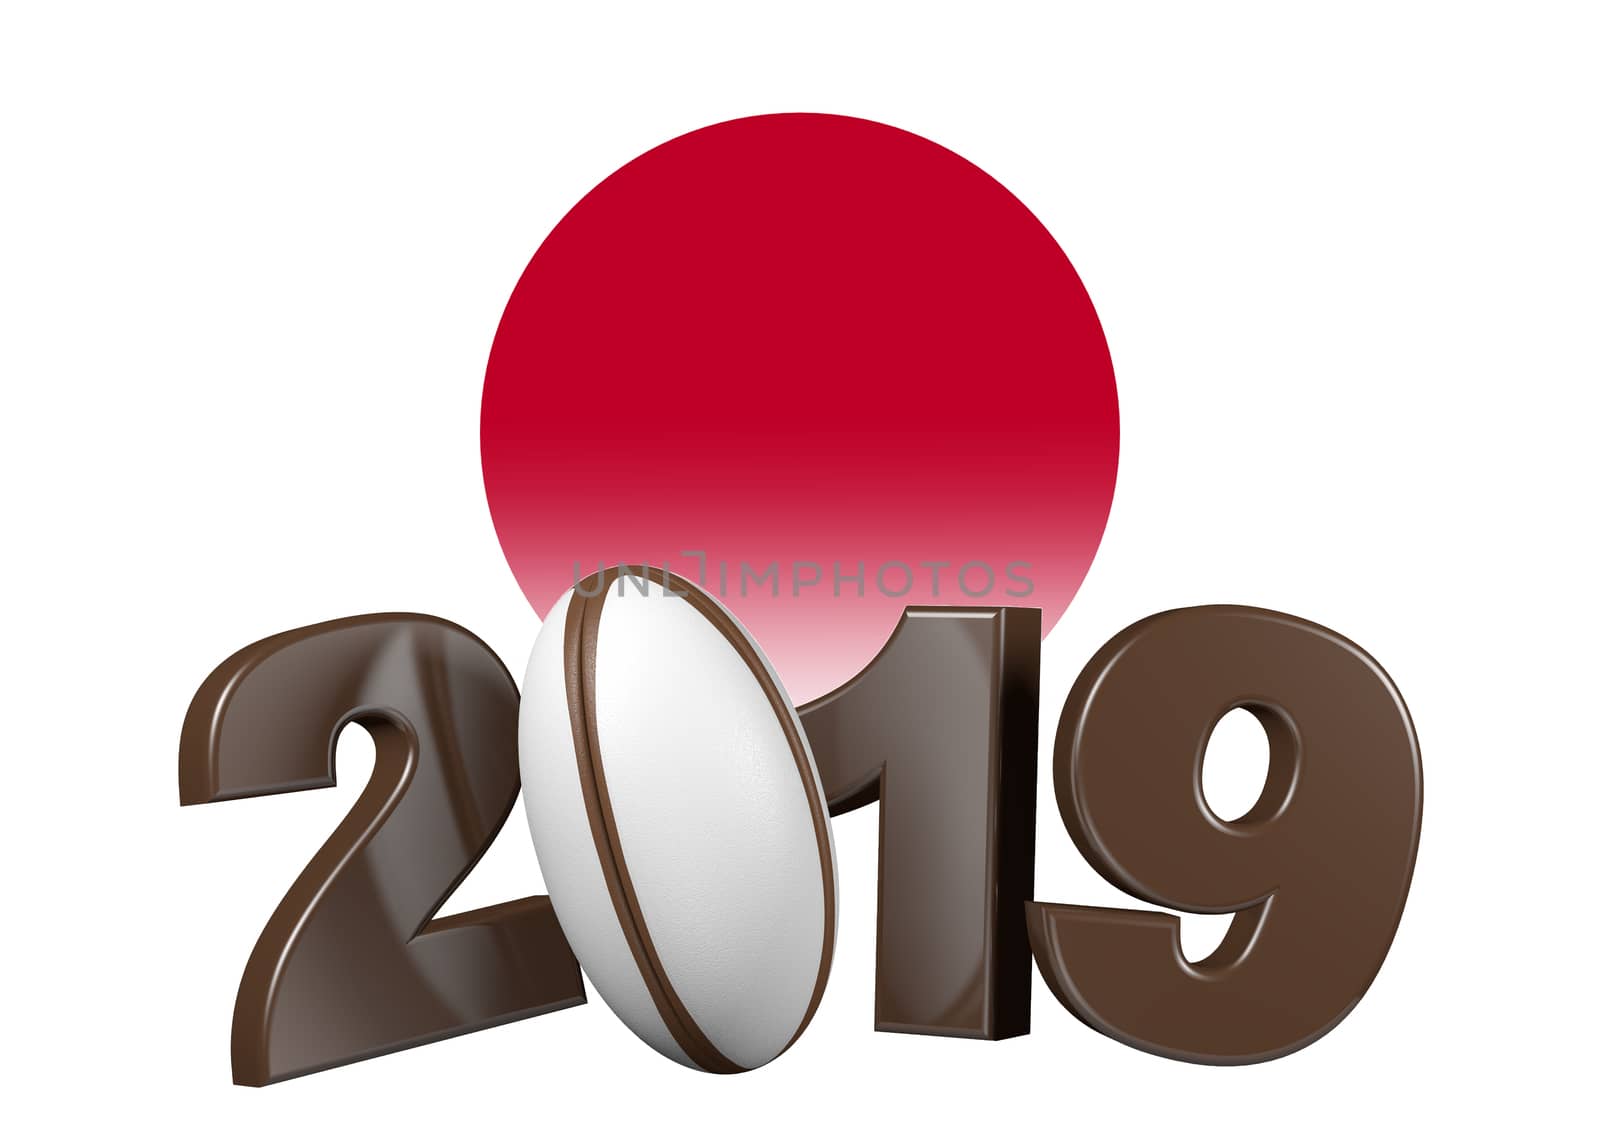 Brown Rugby 2019 design with Japan Flag